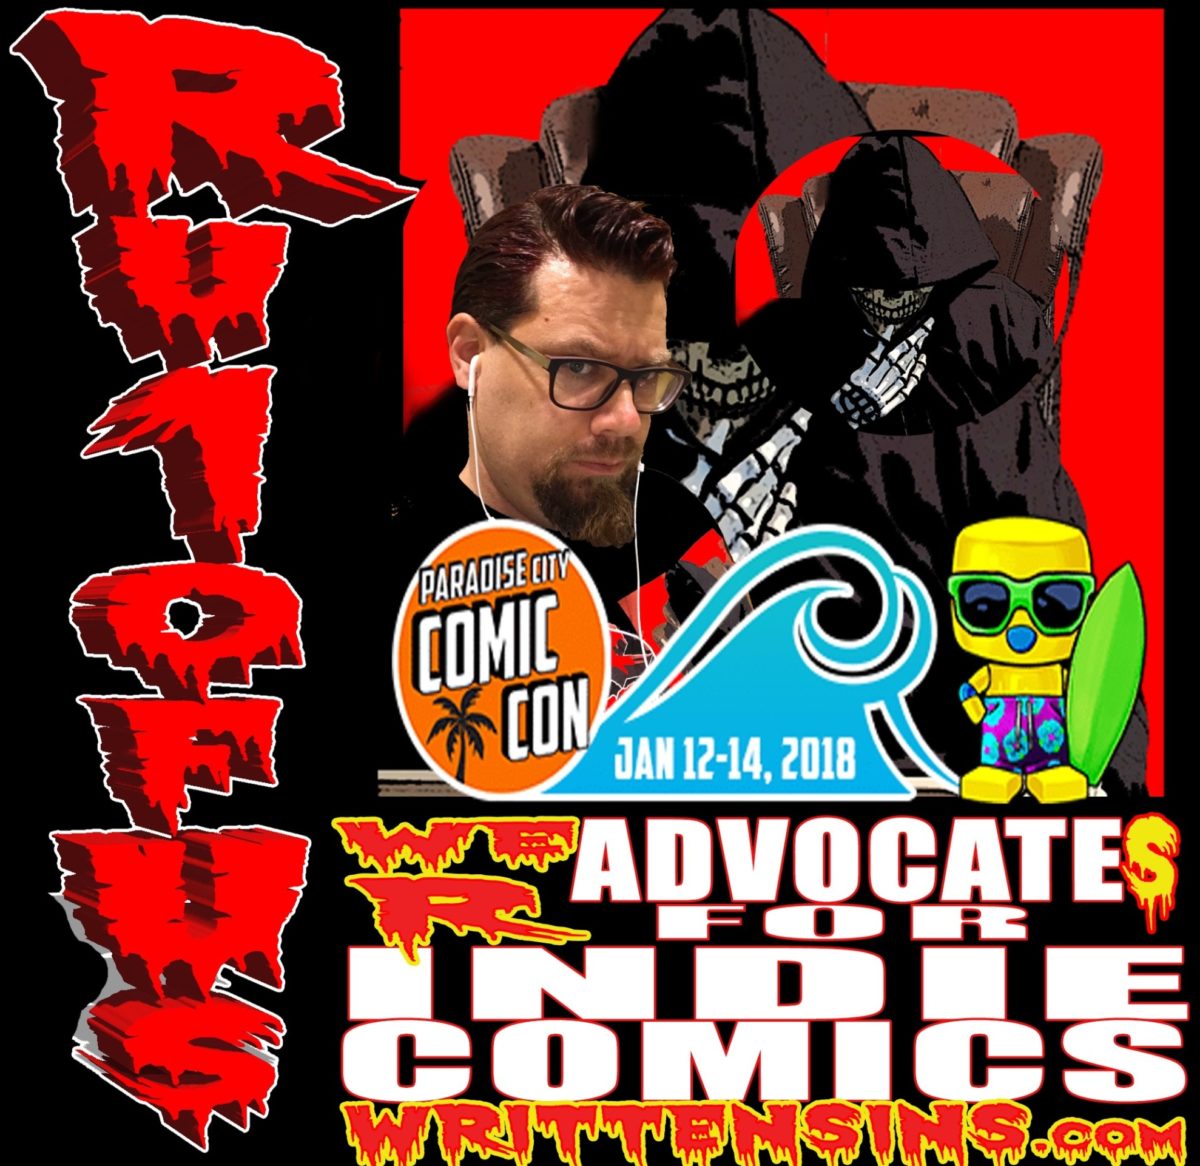 (FL) Paradise City Comic Con is January 12-14, 2018 in Miami, FL with Panel info – WrittenSiNs.com and MR Andersin Show